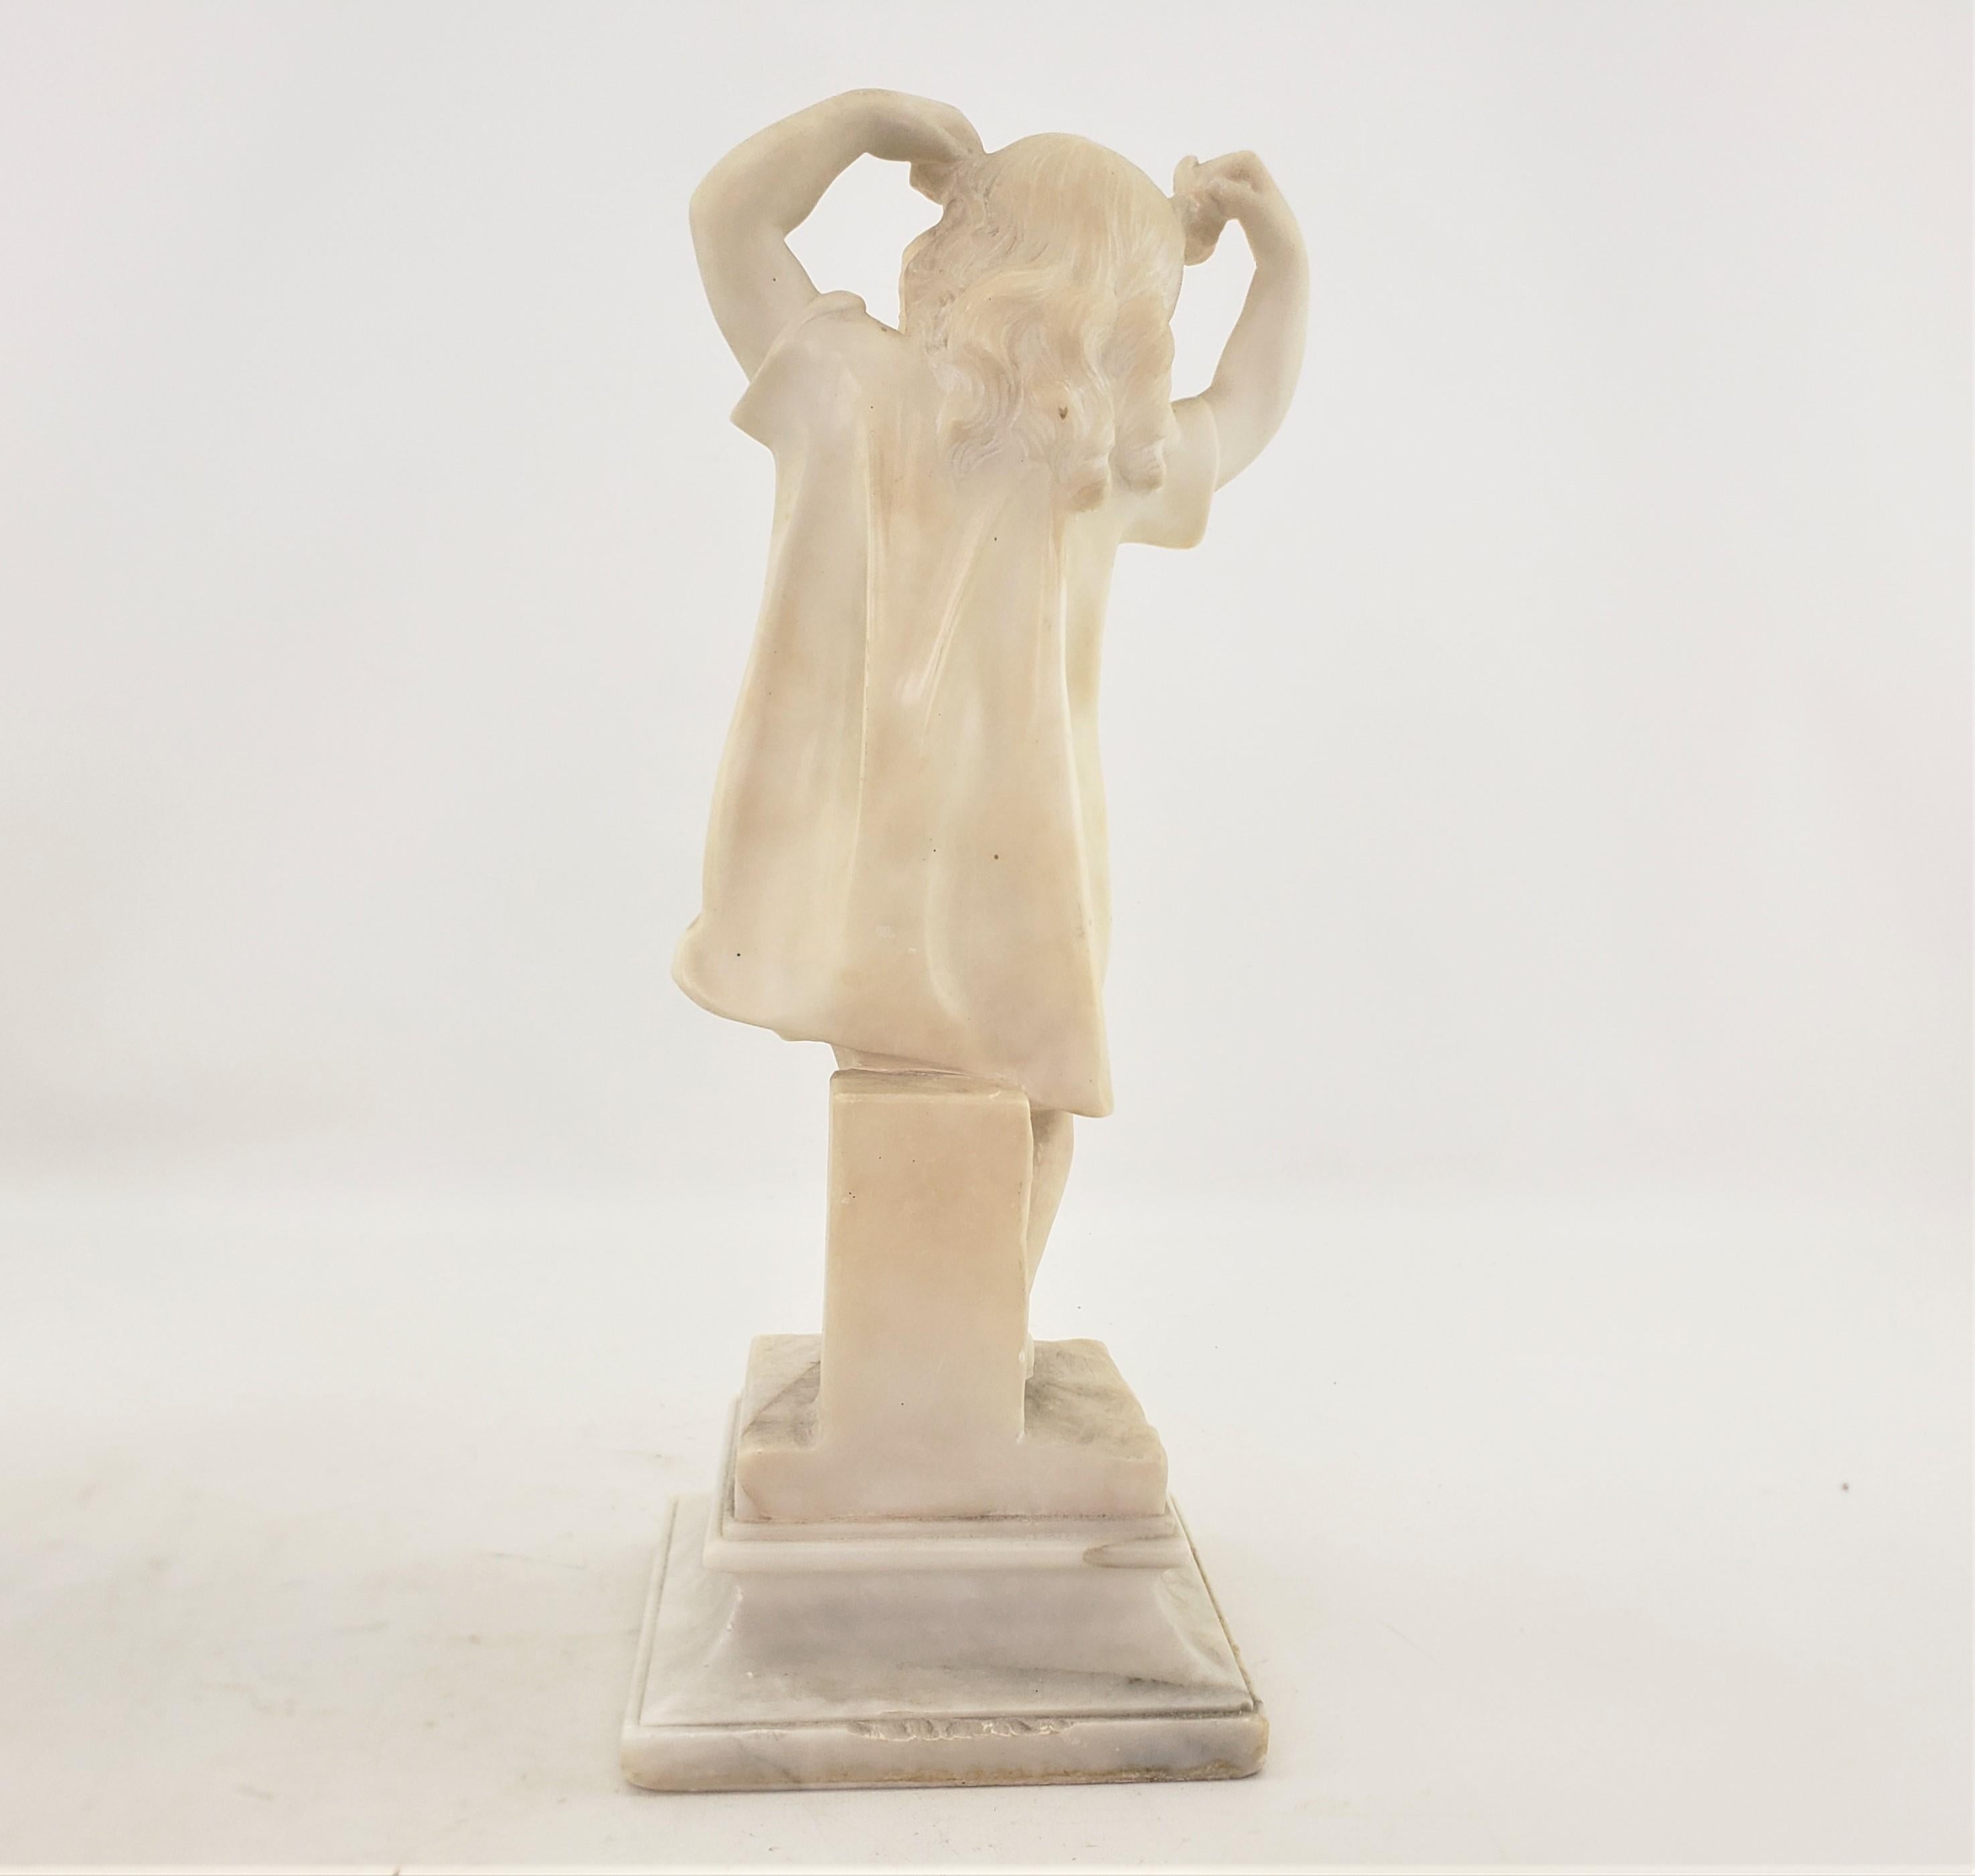 19th Century Antique Hand-Carved Alabaster Sculpture of a Young Girl with Flowered Headband